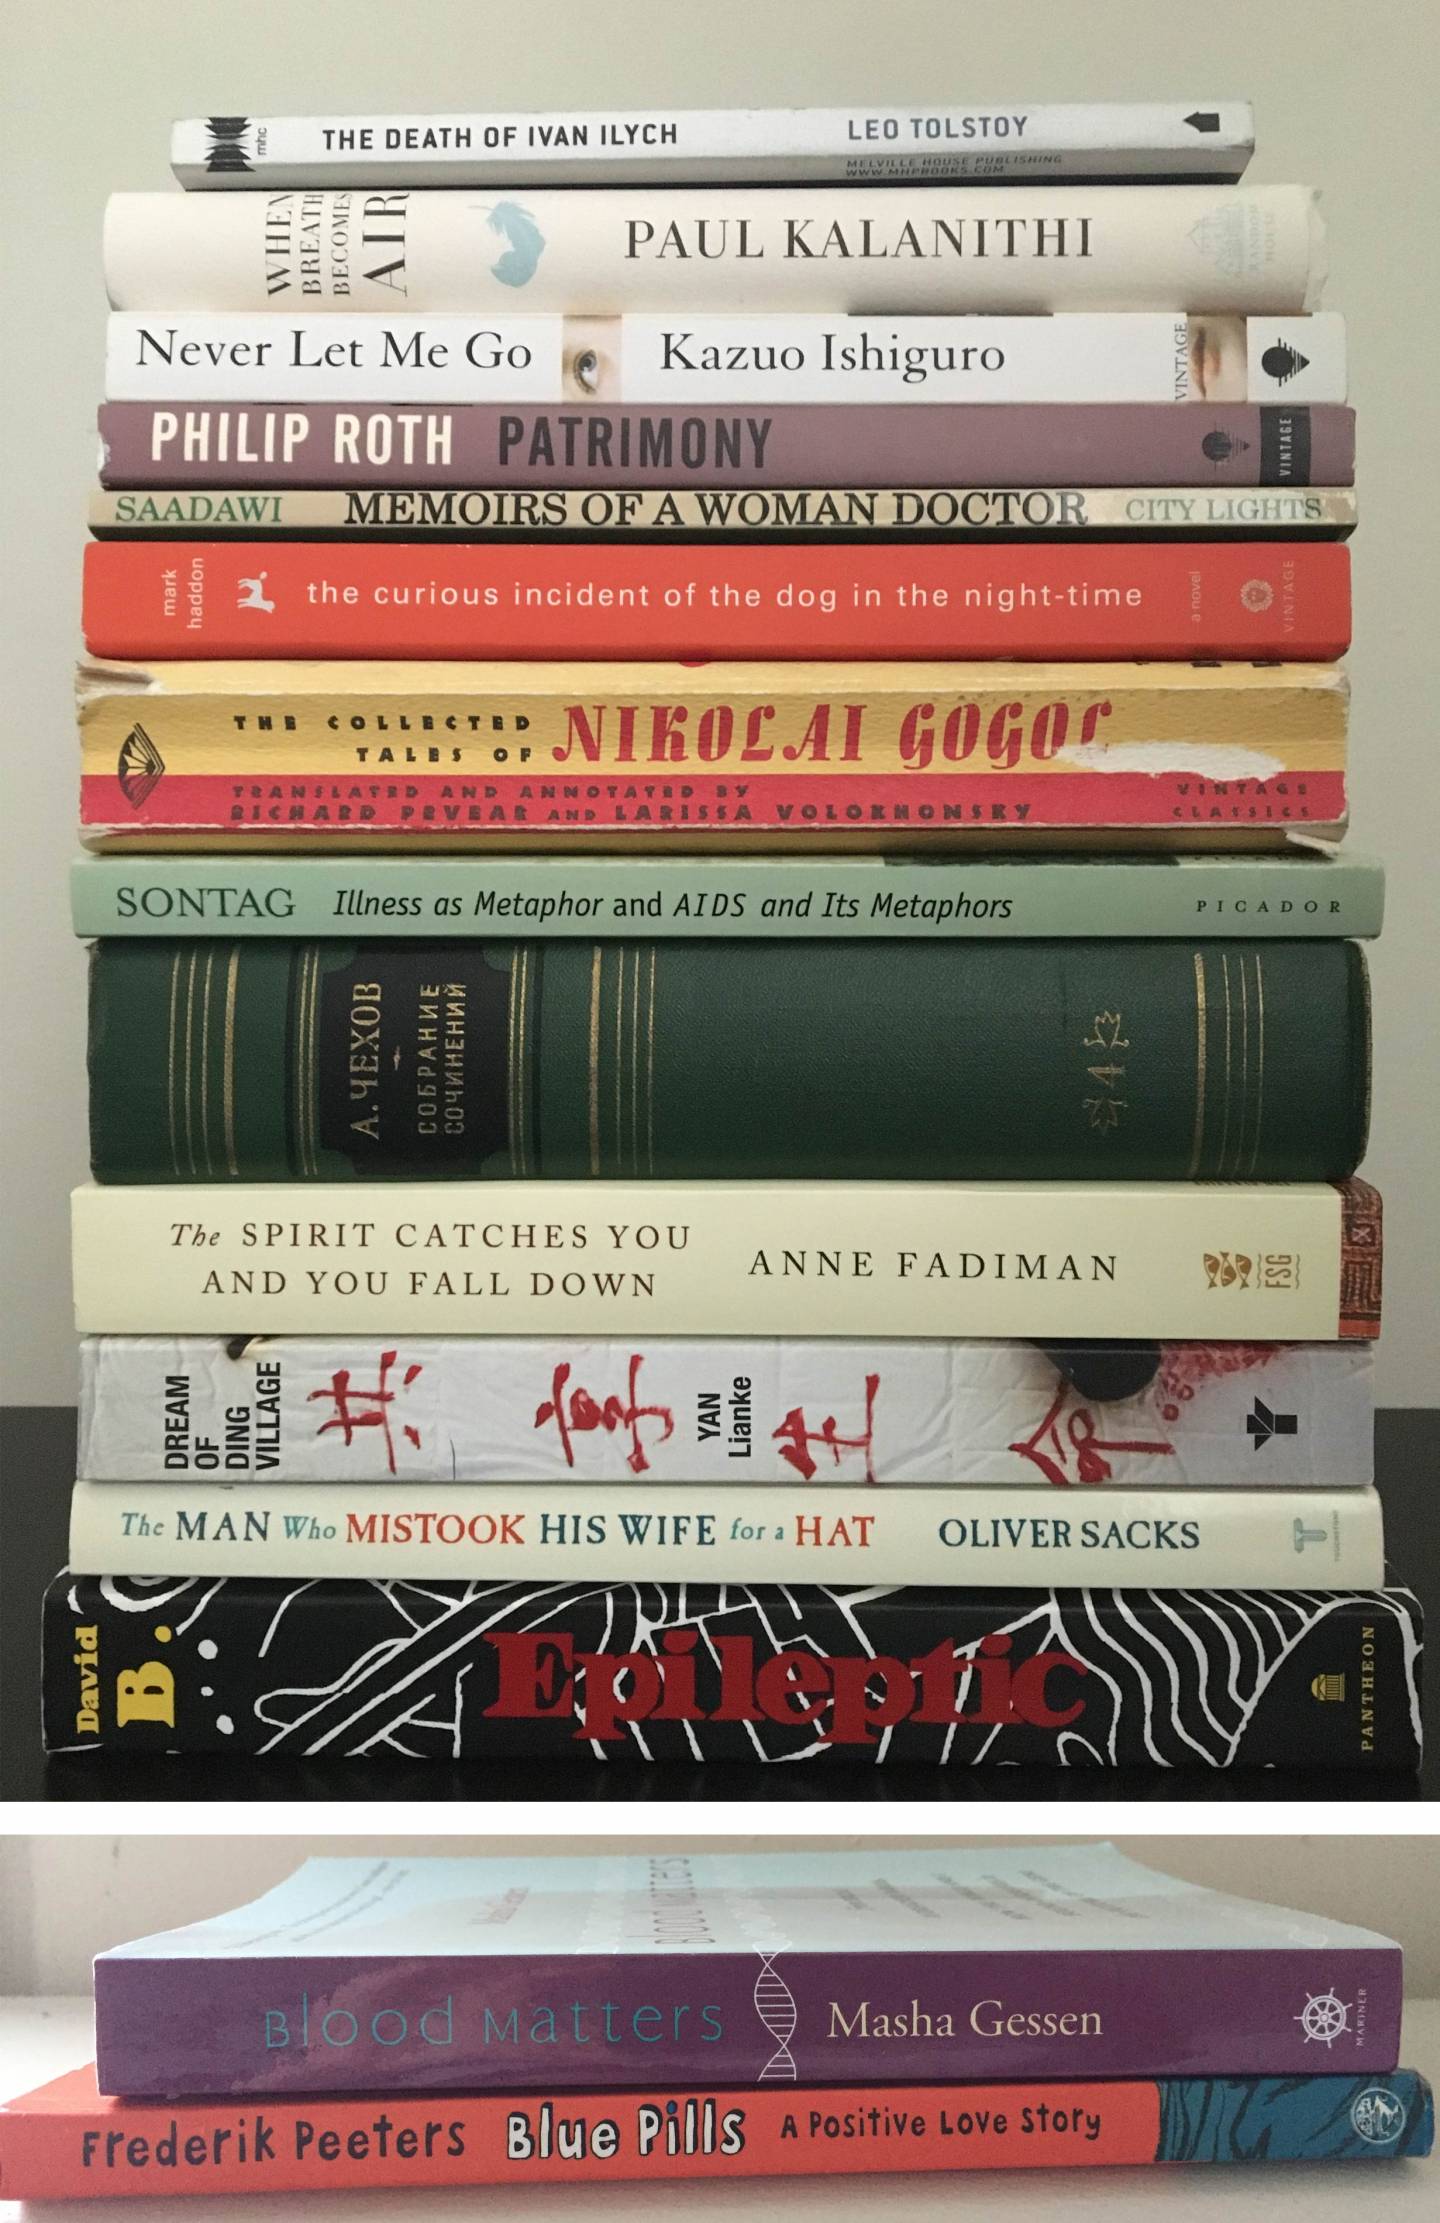 A stack of books, featuring “The Death of Ivan Ilych” by Leo Tolstoy; “When Breath Becomes Air” by Paul Kalanithi; “Patrimony” by Philip Roth; “Memoirs of a Woman Doctor” by Saadawi; “the curious incident of the dog in night-time” by Mark Haddon; “The Collected Tales of Nikolai Gogol; “Illness as Metaphor and AIDS and Its Metaphors” by Sontag; “The Spirit Catches You and You Fall Down” by Anne Fadiman; “Dream of Dog Village” by Yan Lianke; "The Man Who Mistook His Wife for a Hat” by Oliver Sacks; “Epileptic